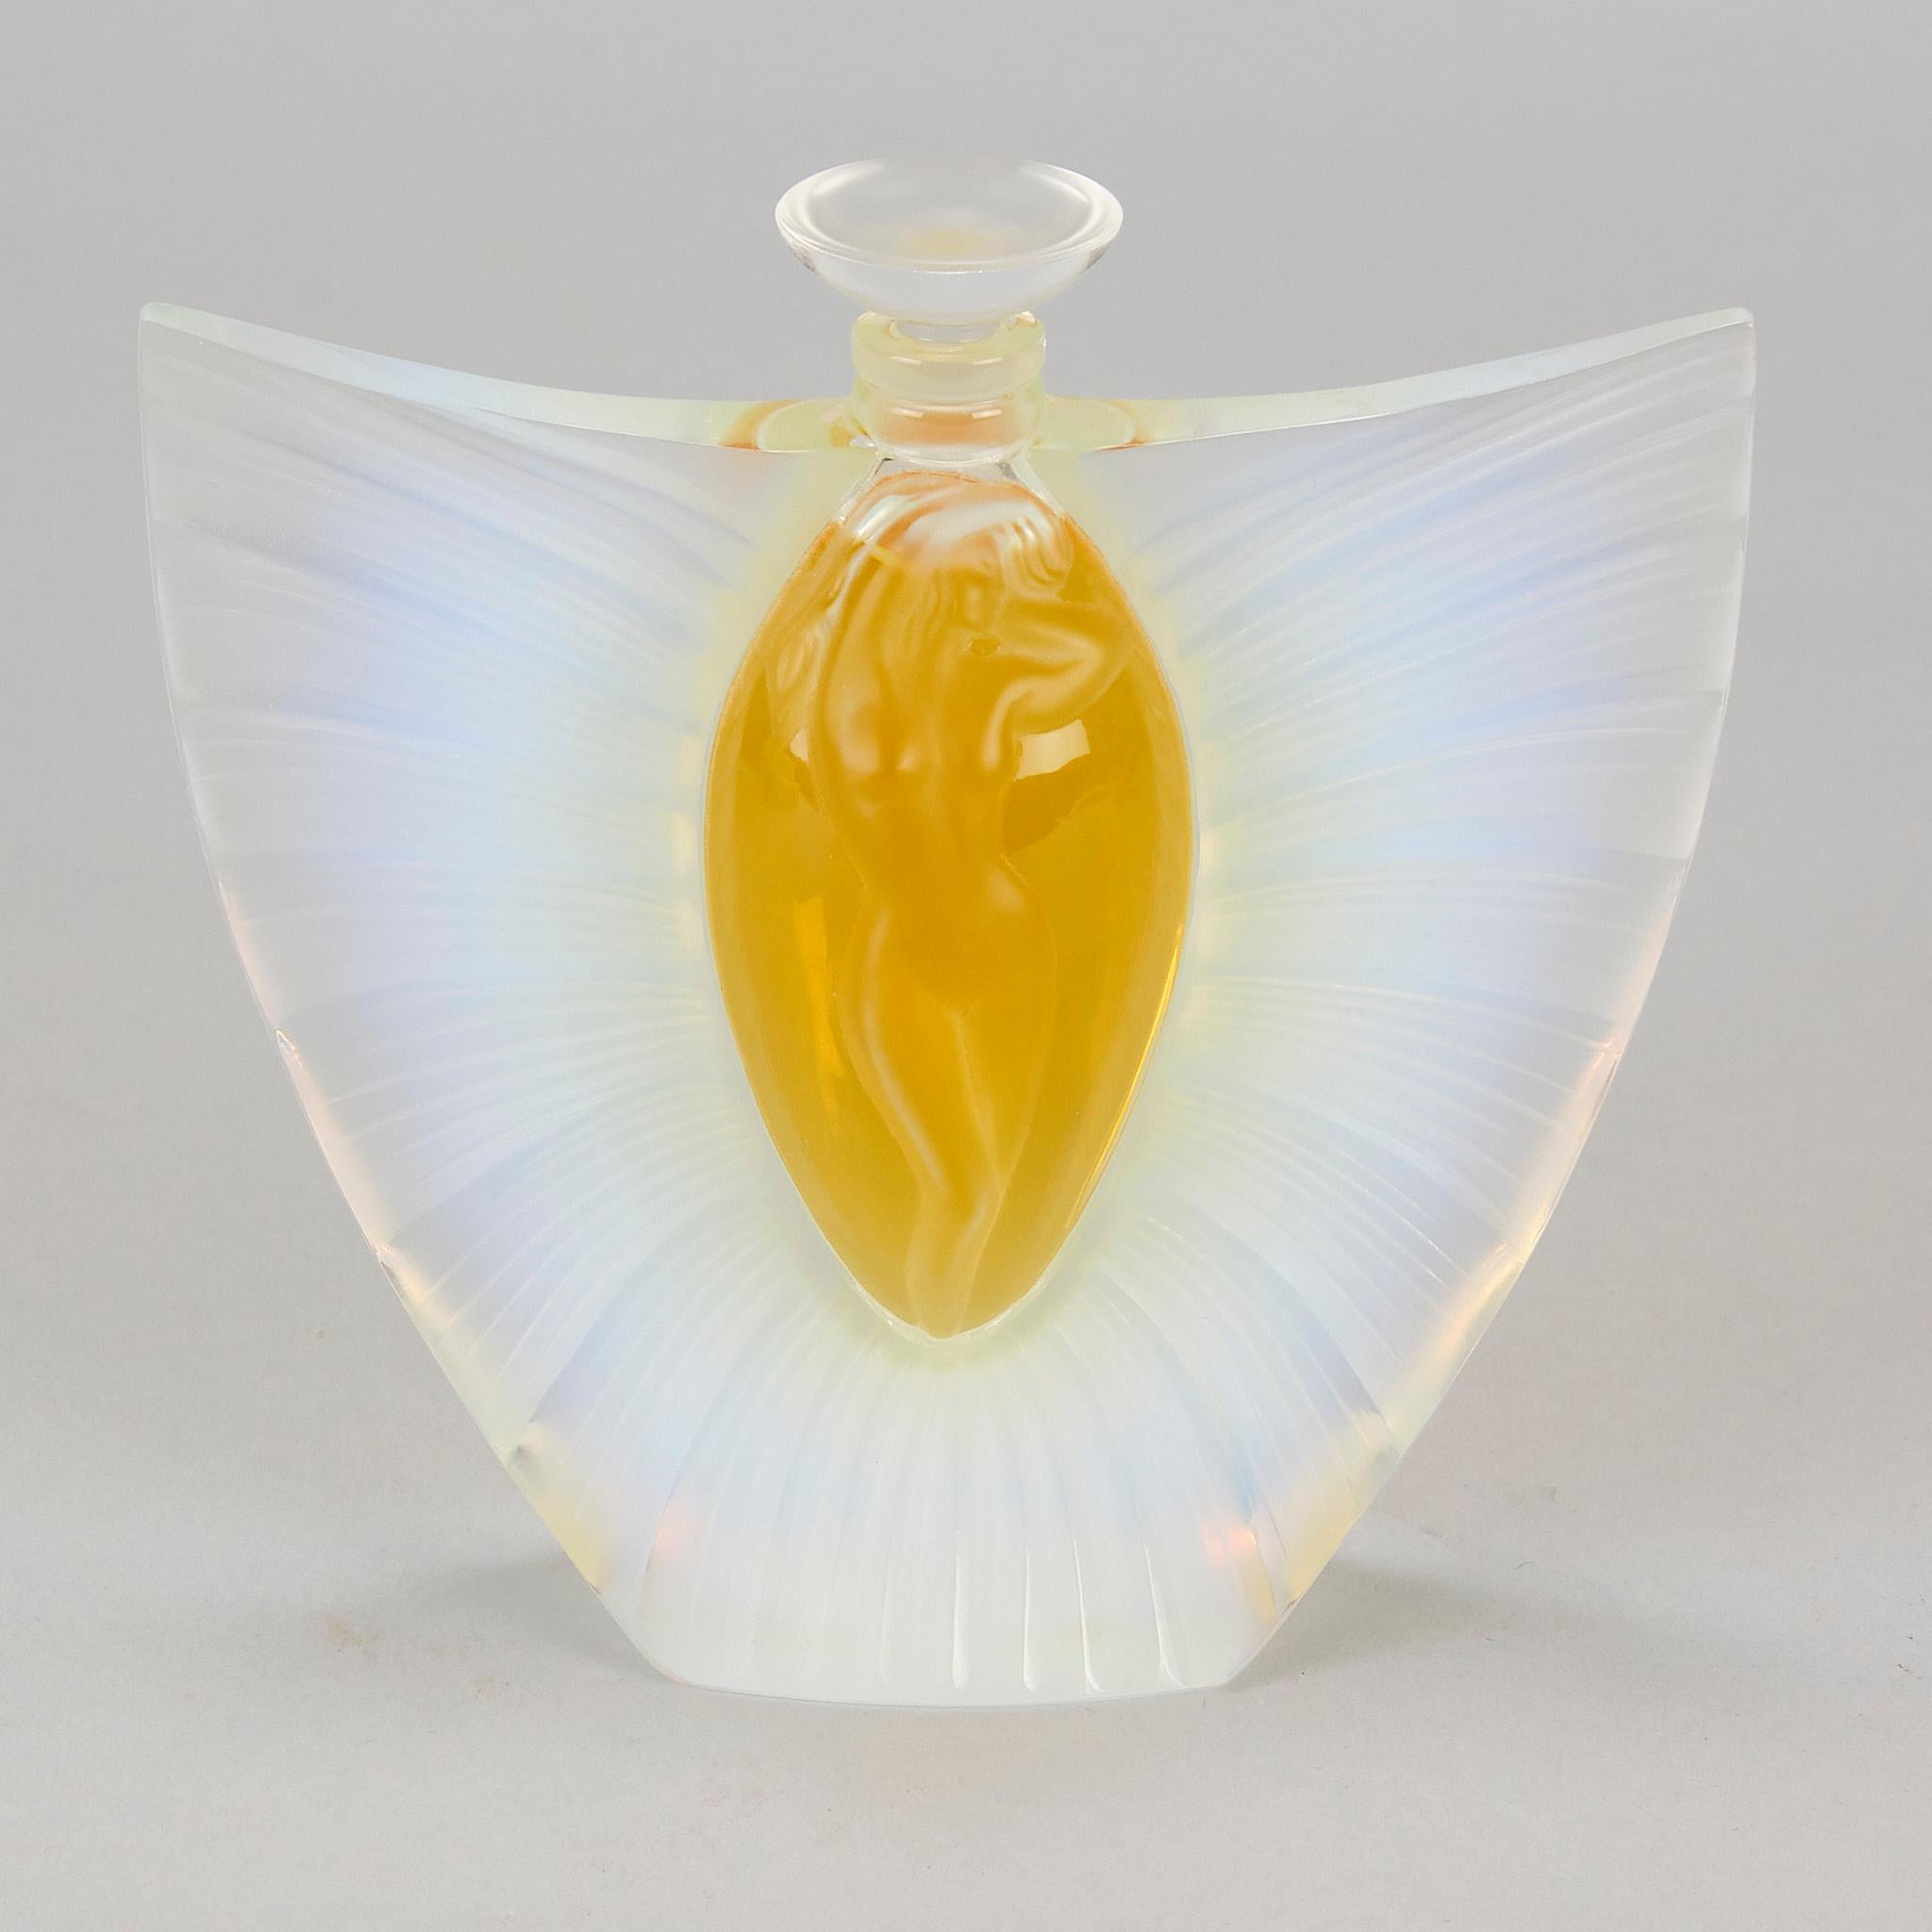 A stunning late 20th Century French Limited edition opalescent crystal glass flacon, the sides with opening wings revealing a beautiful femal figure in the central cartouche. The flacon has wonderful depth and detail and is signed and